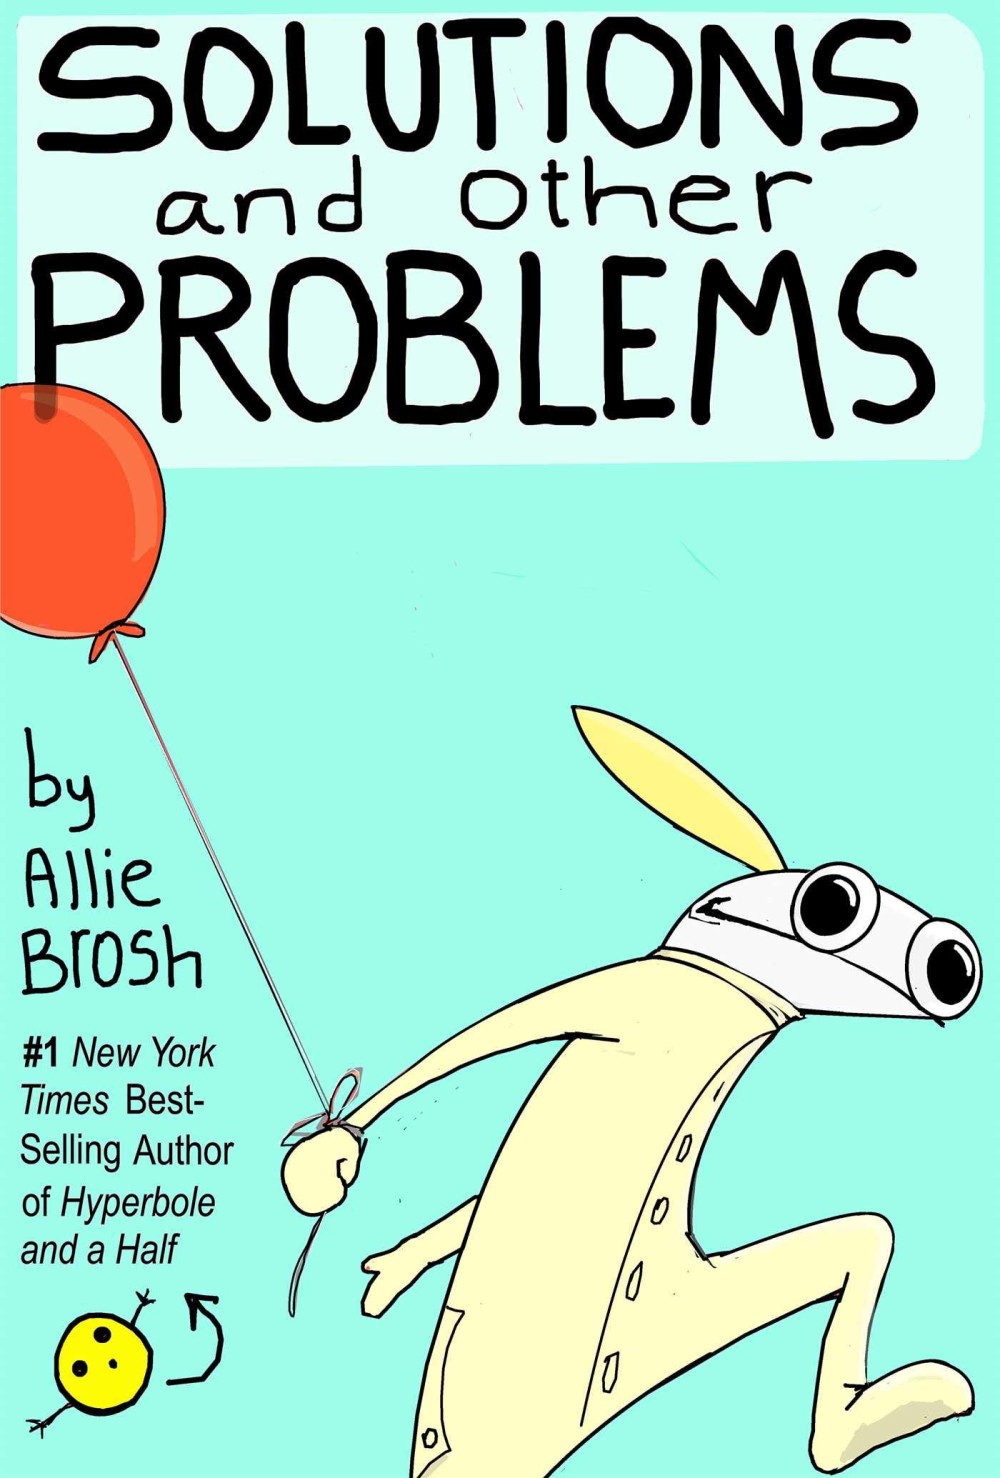 'Solutions and Other Problems' by Allie Brosh